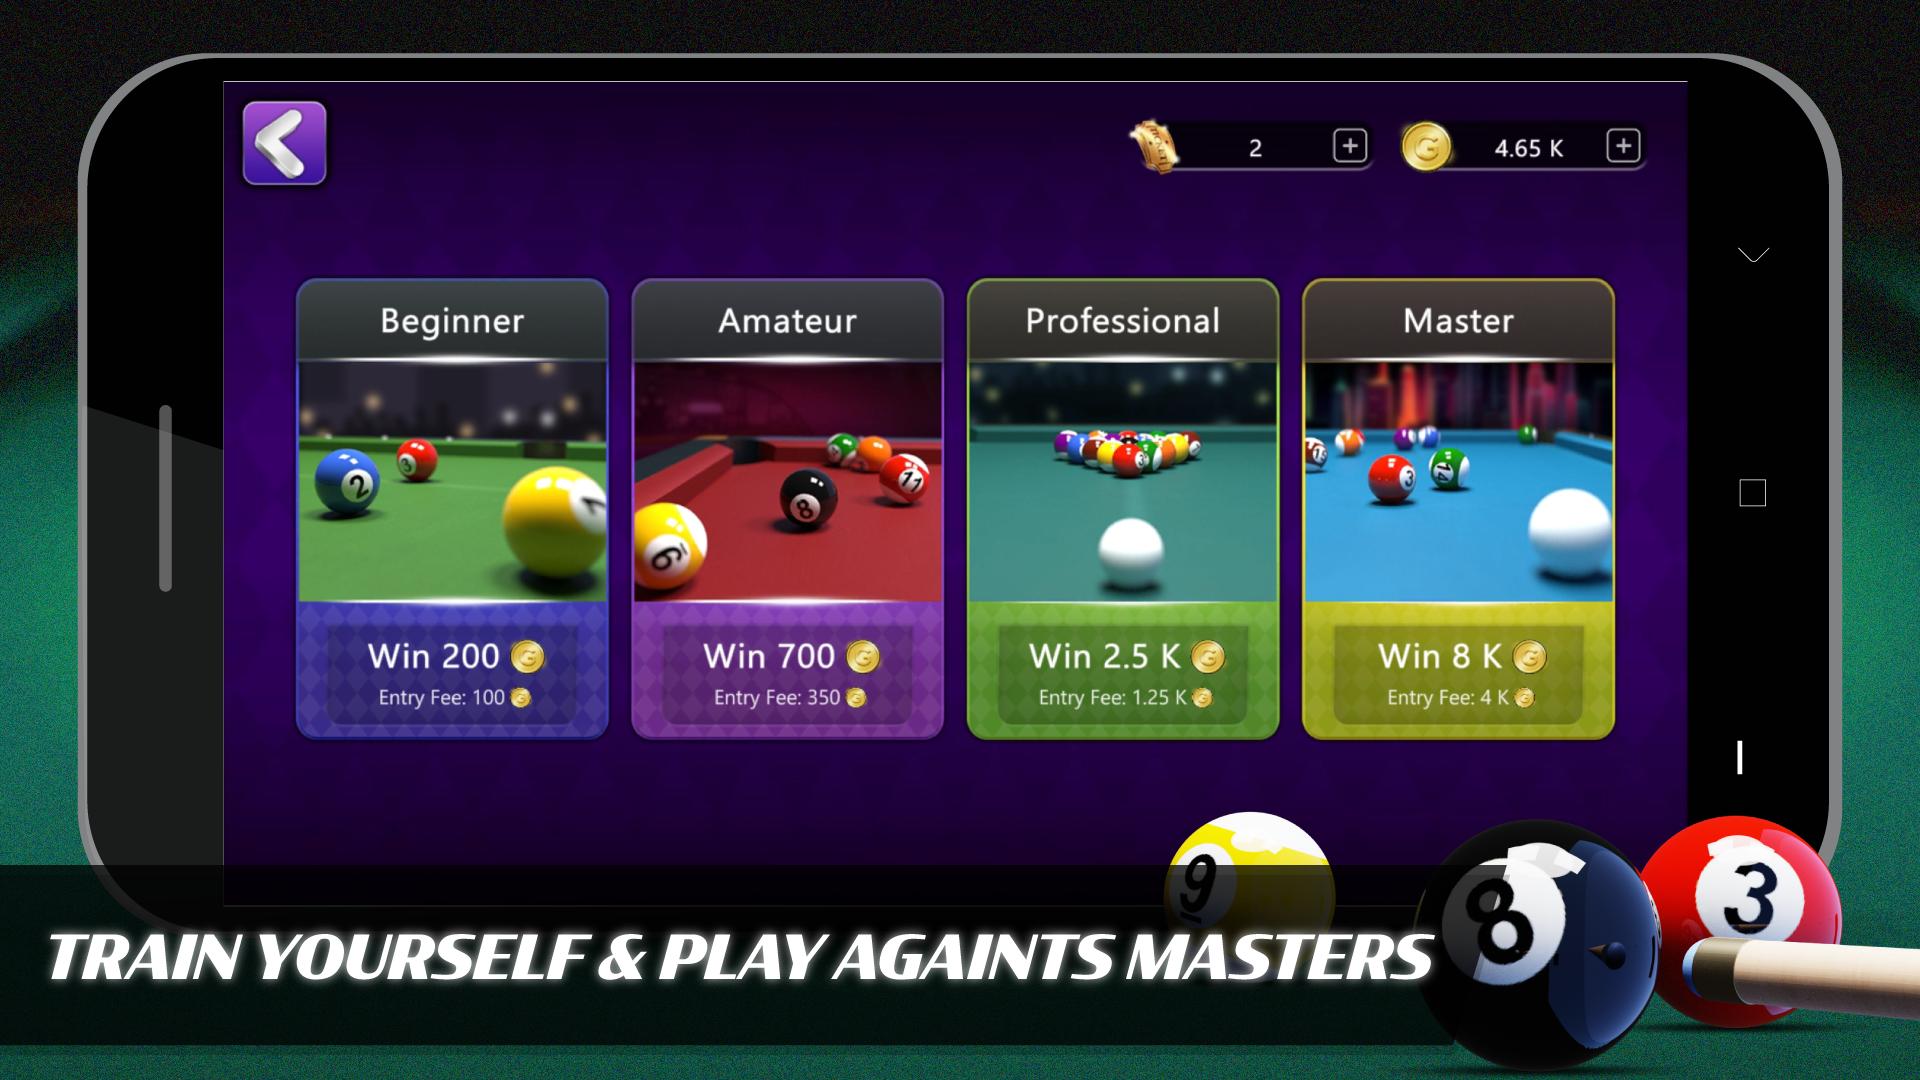 Download 8 Ball Pool Billiards Online Free for Android - 8 Ball